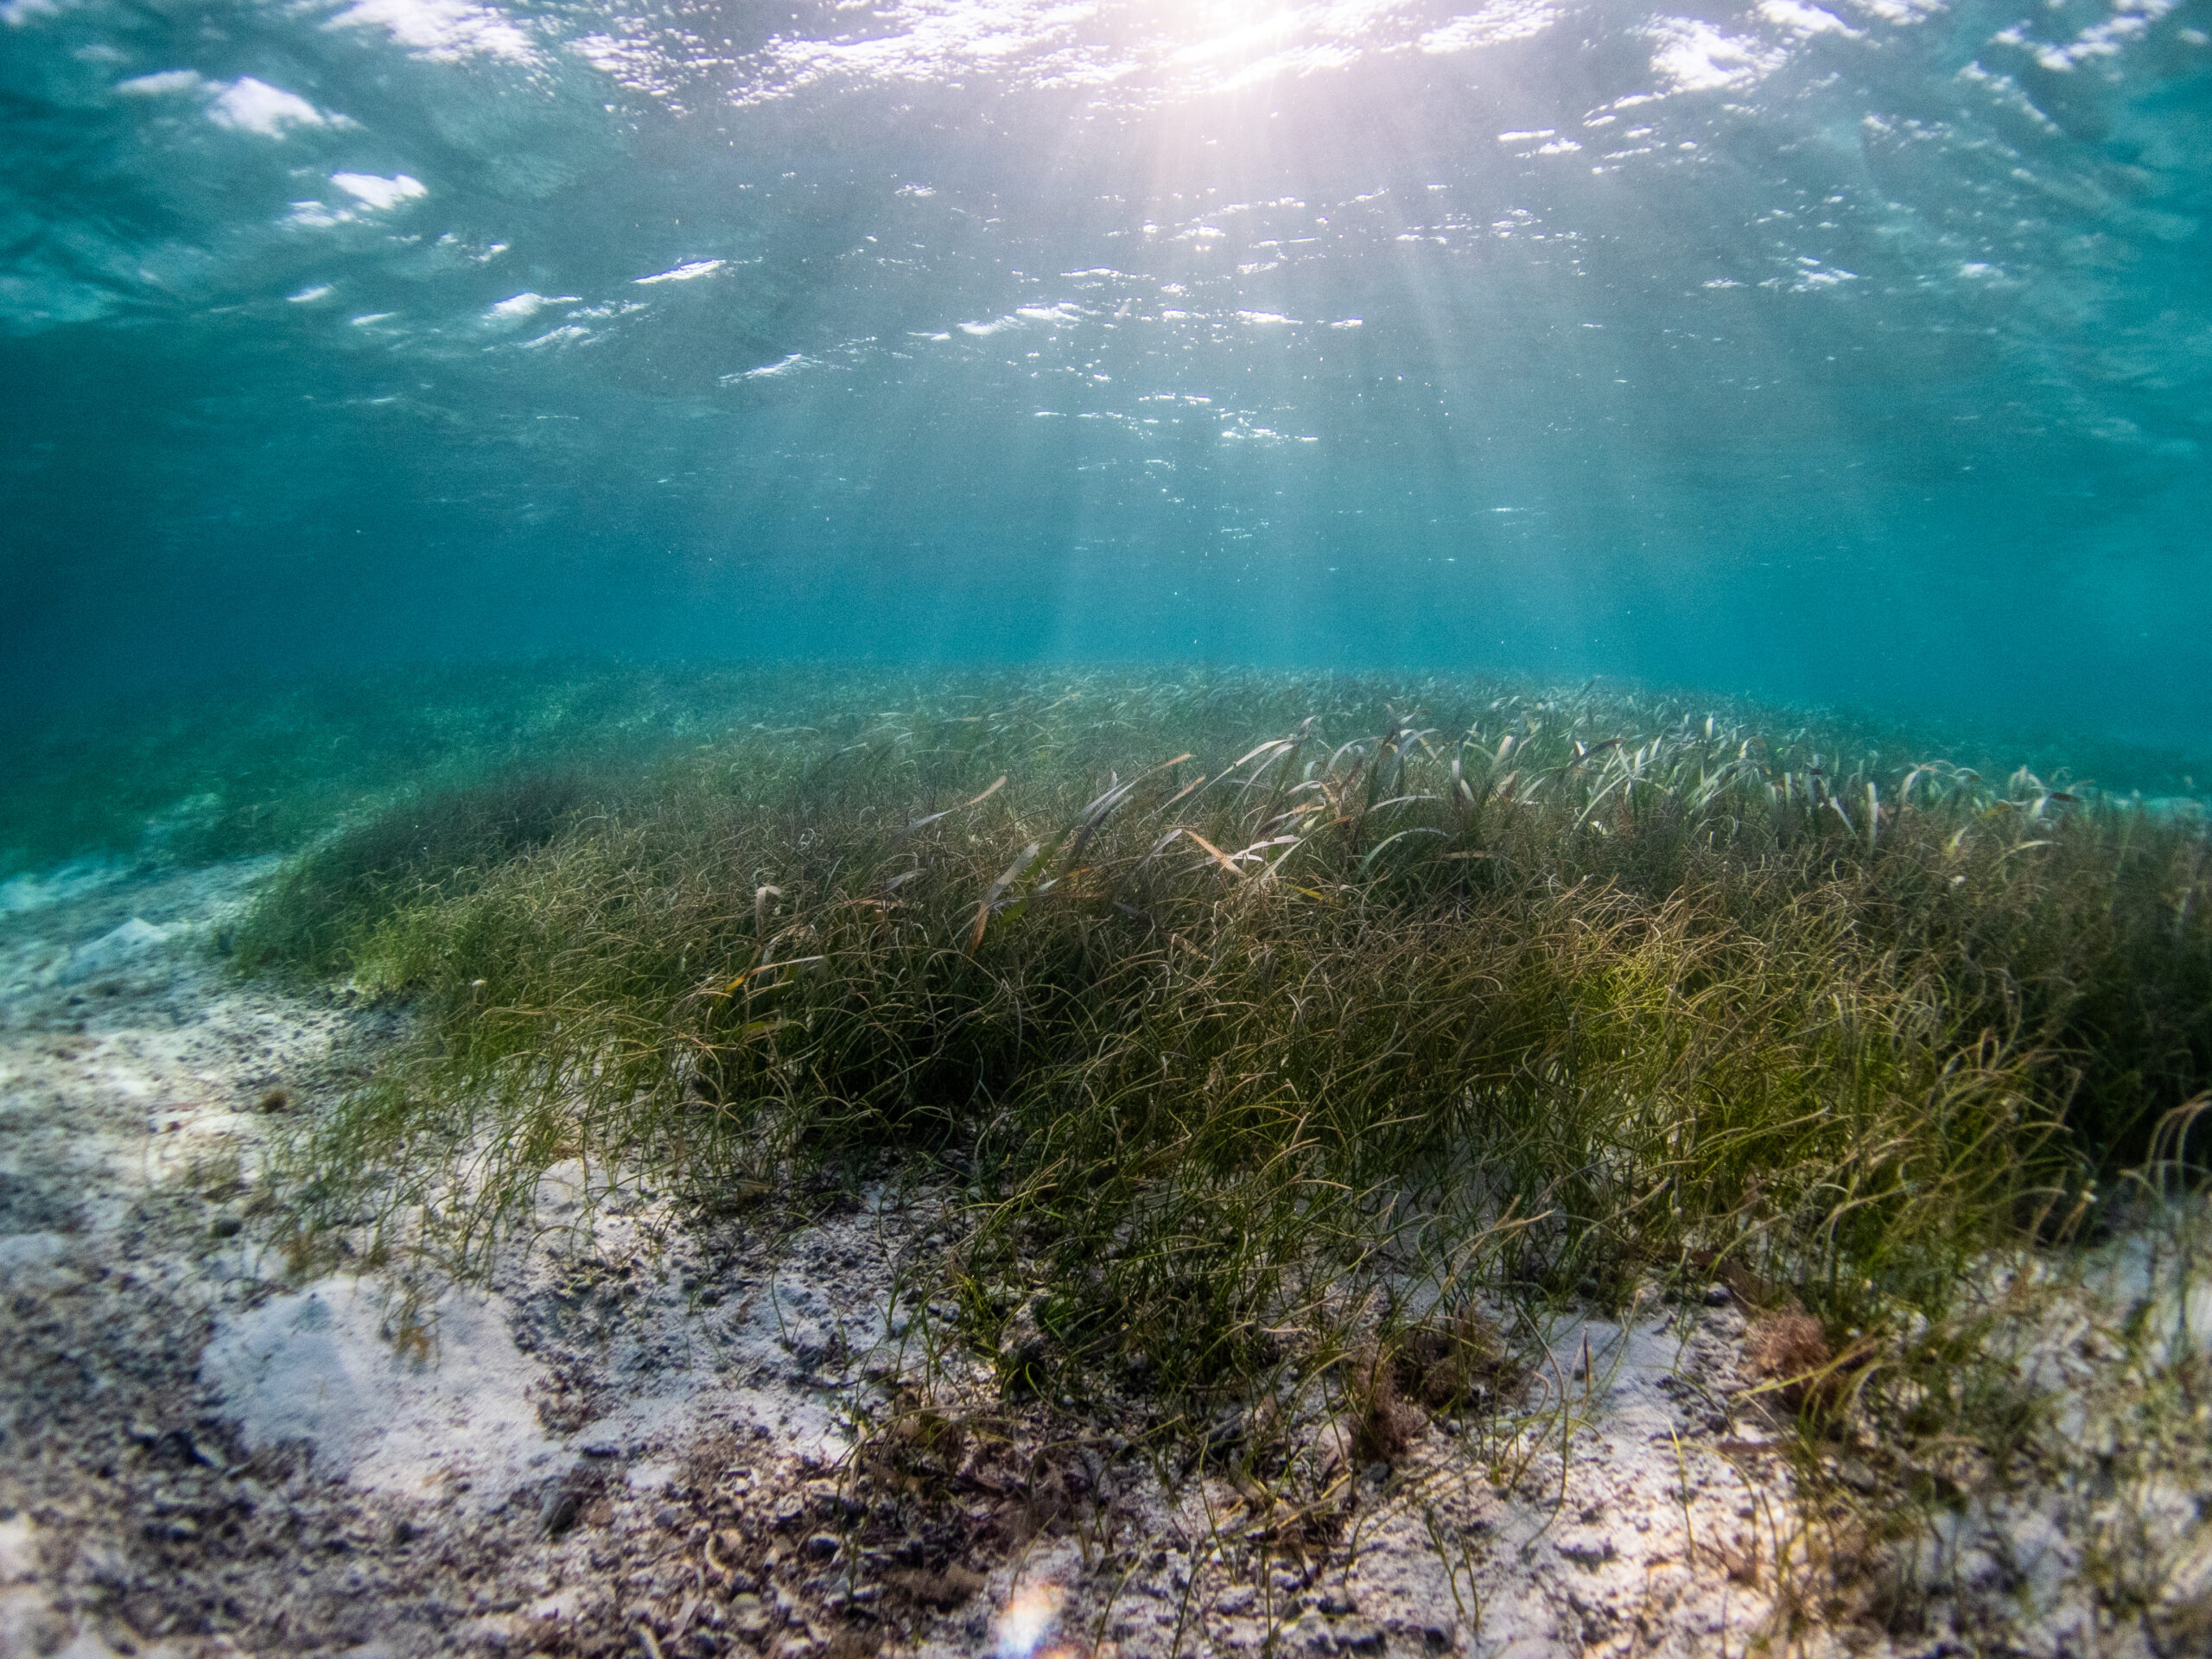 Caribbean seagrasses provide services worth $255B annually, including vast carbon storage